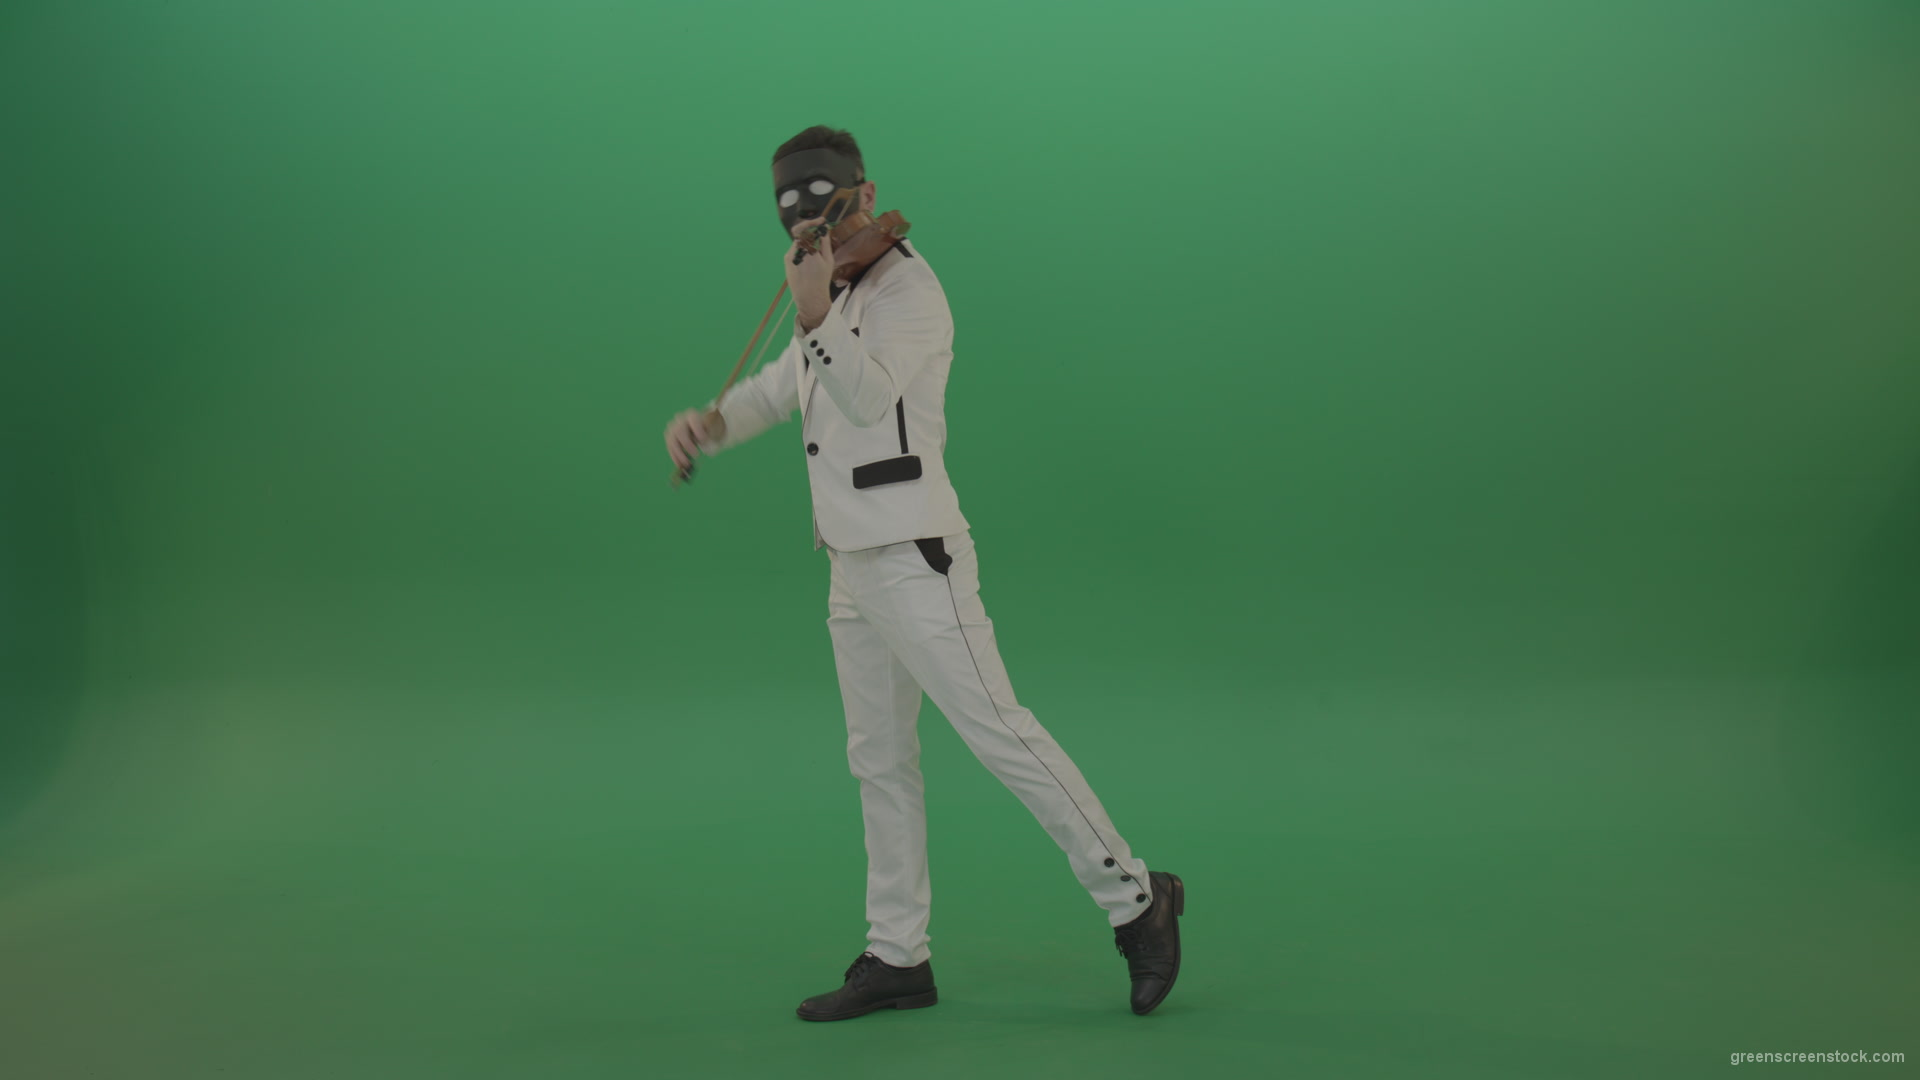 Violinist-in-a-white-jacket-and-in-a-black-mask-with-white-eyes-plays-melodically-on-the-violin_004 Green Screen Stock